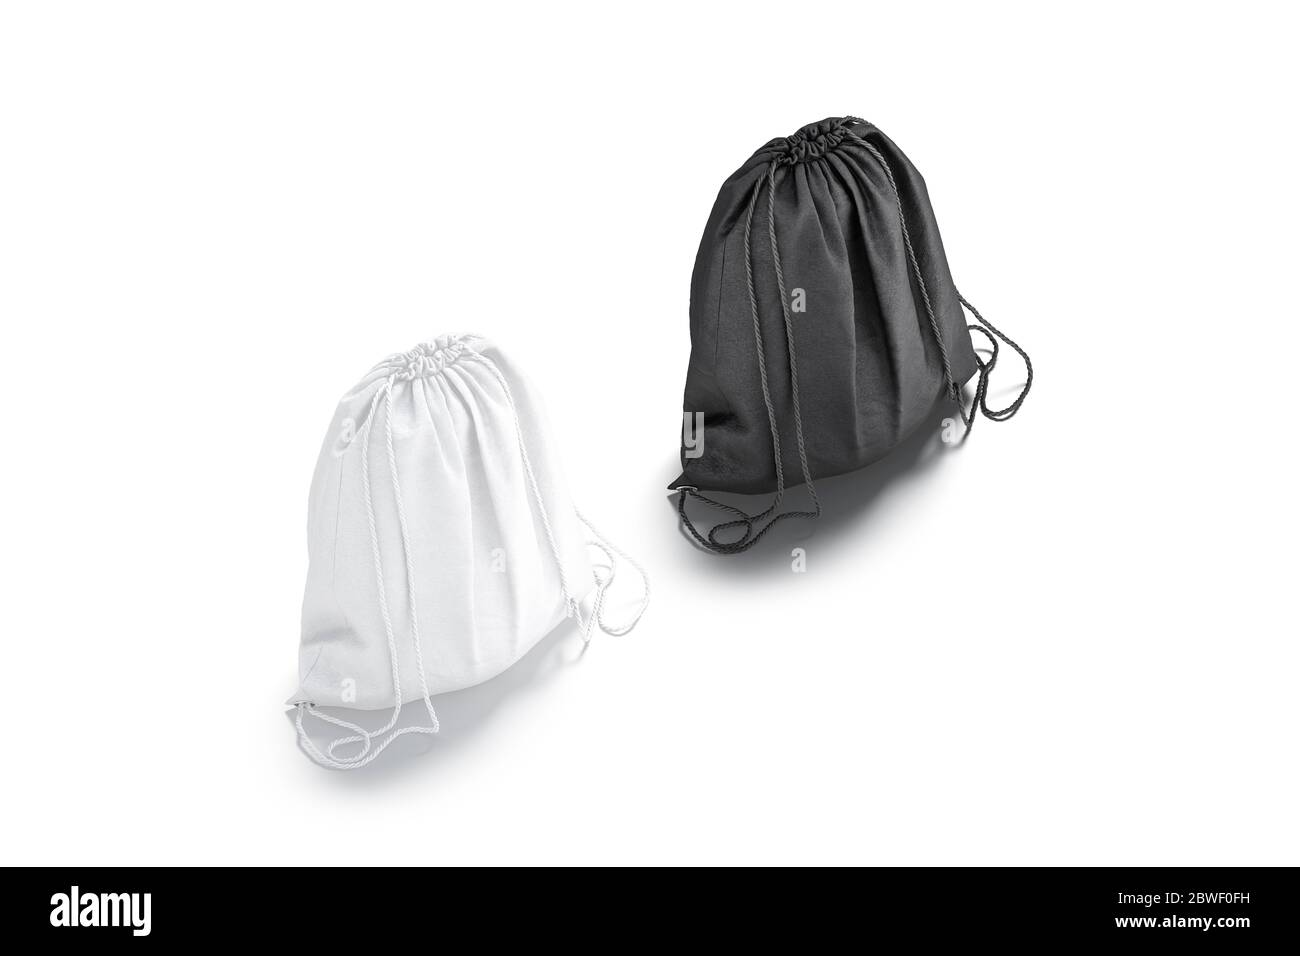 Download Blank Black And White Drawstring Backpack Mockup Set Side View Stock Photo Alamy